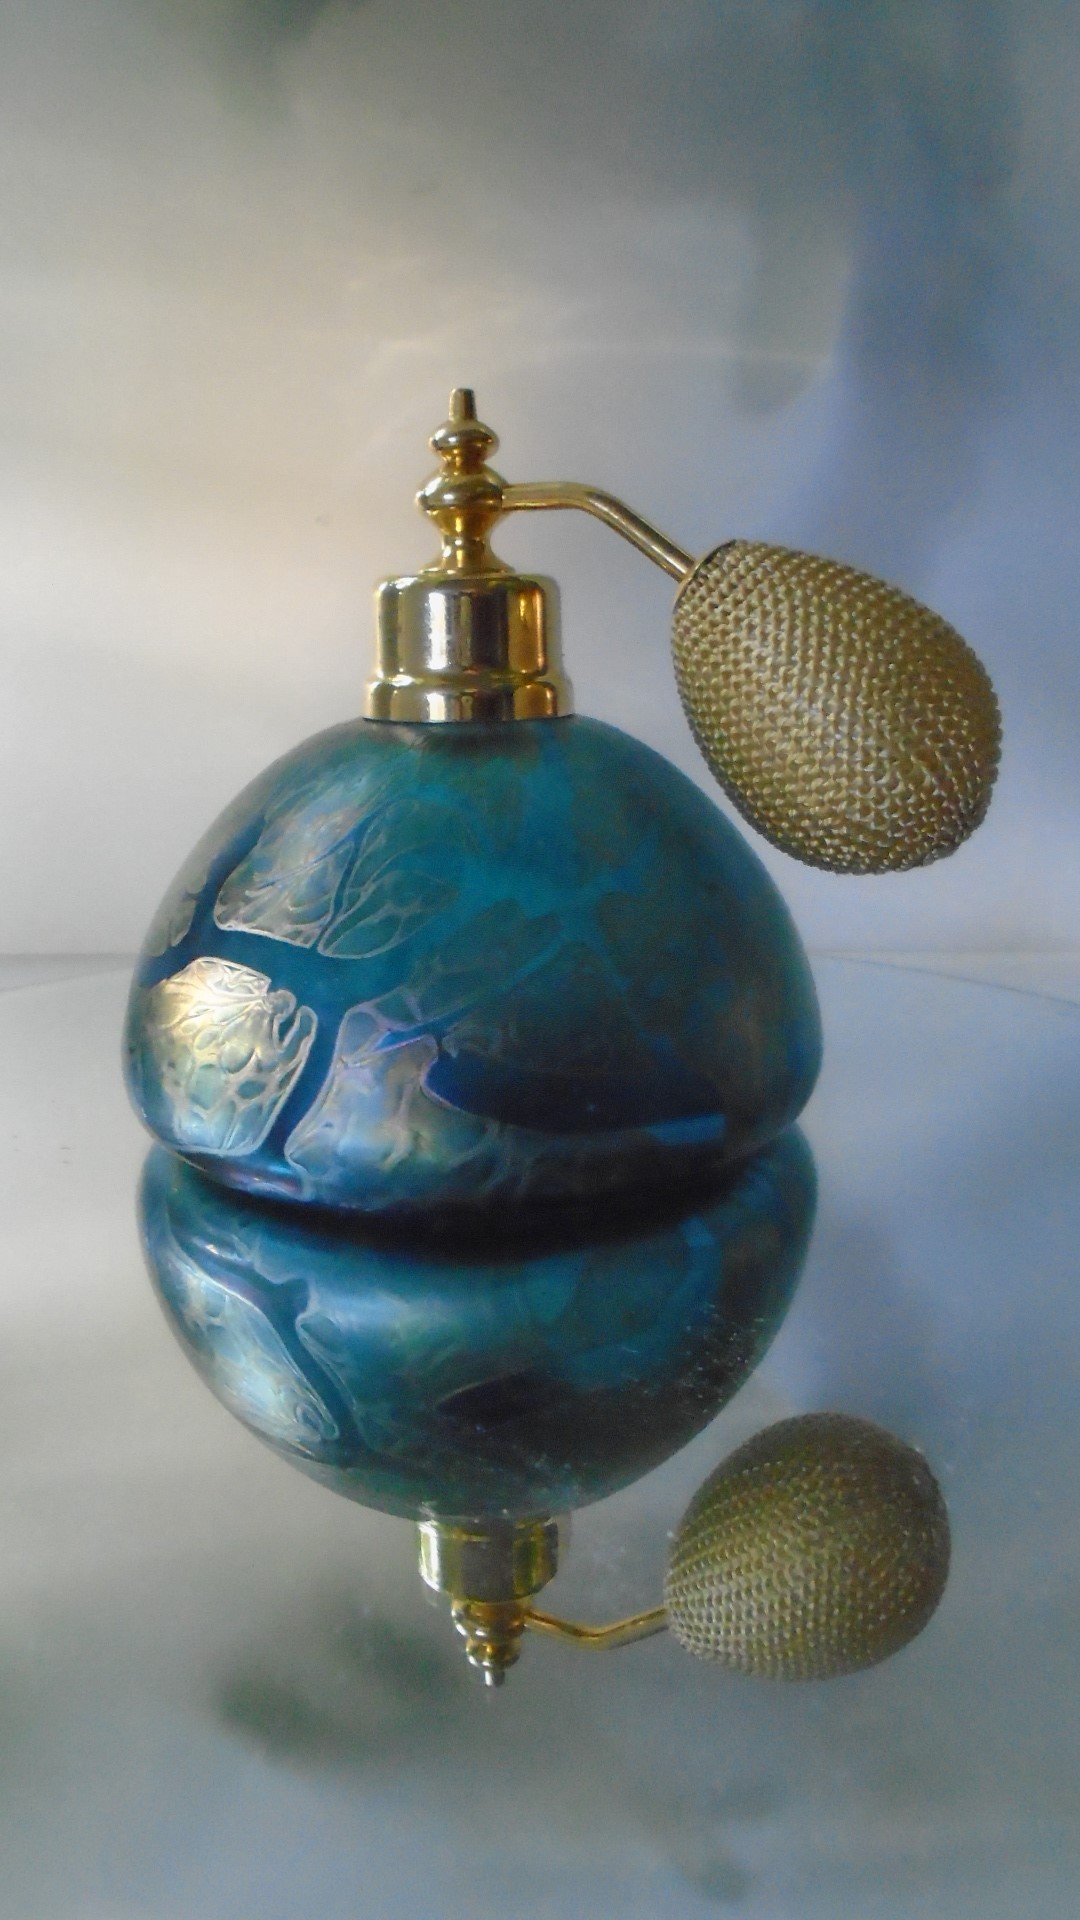 Beautiful example of a Vintage 80s Royal Brierley Studio Dome shaped Perfume Atomizer. Iridescent decoration over a peacock blue glass